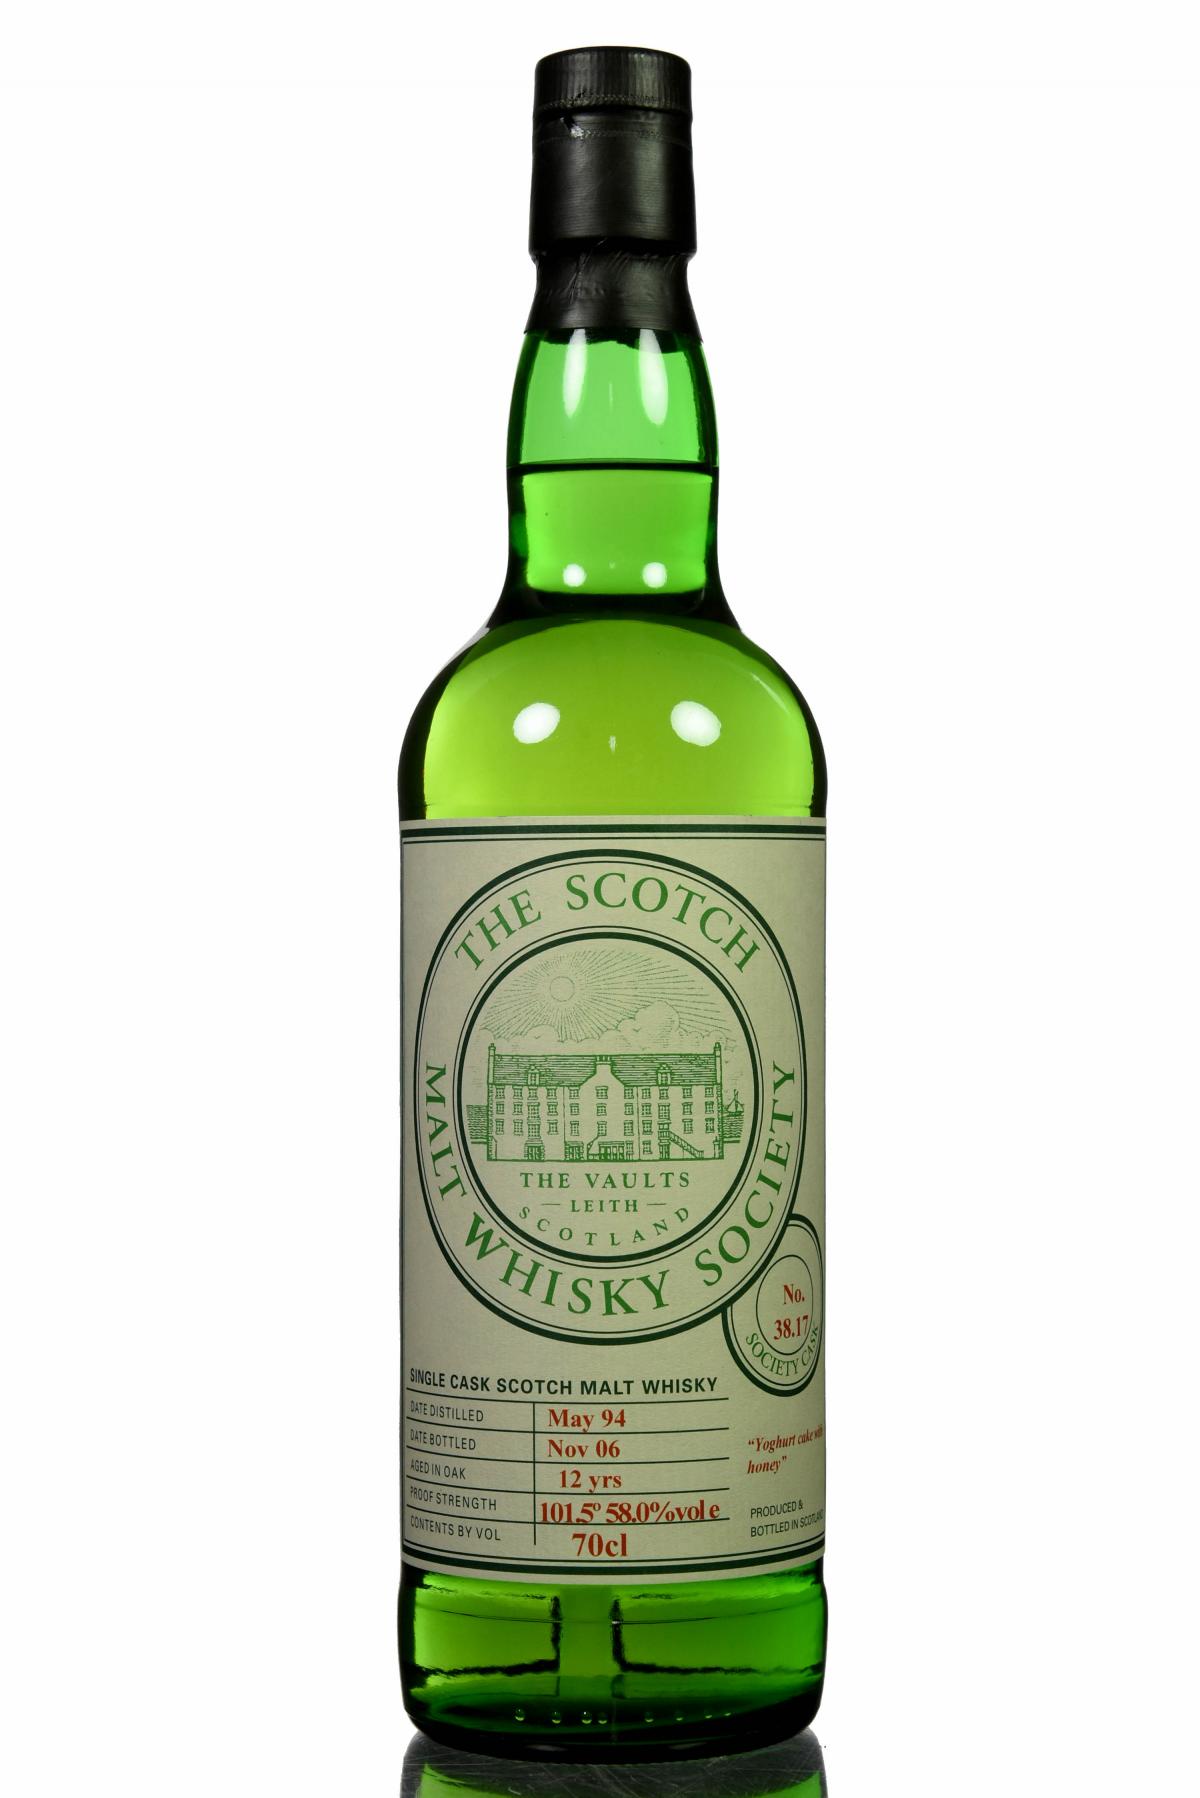 Caperdonich 1994-2006 - 12 Year Old - SMWS 38.17